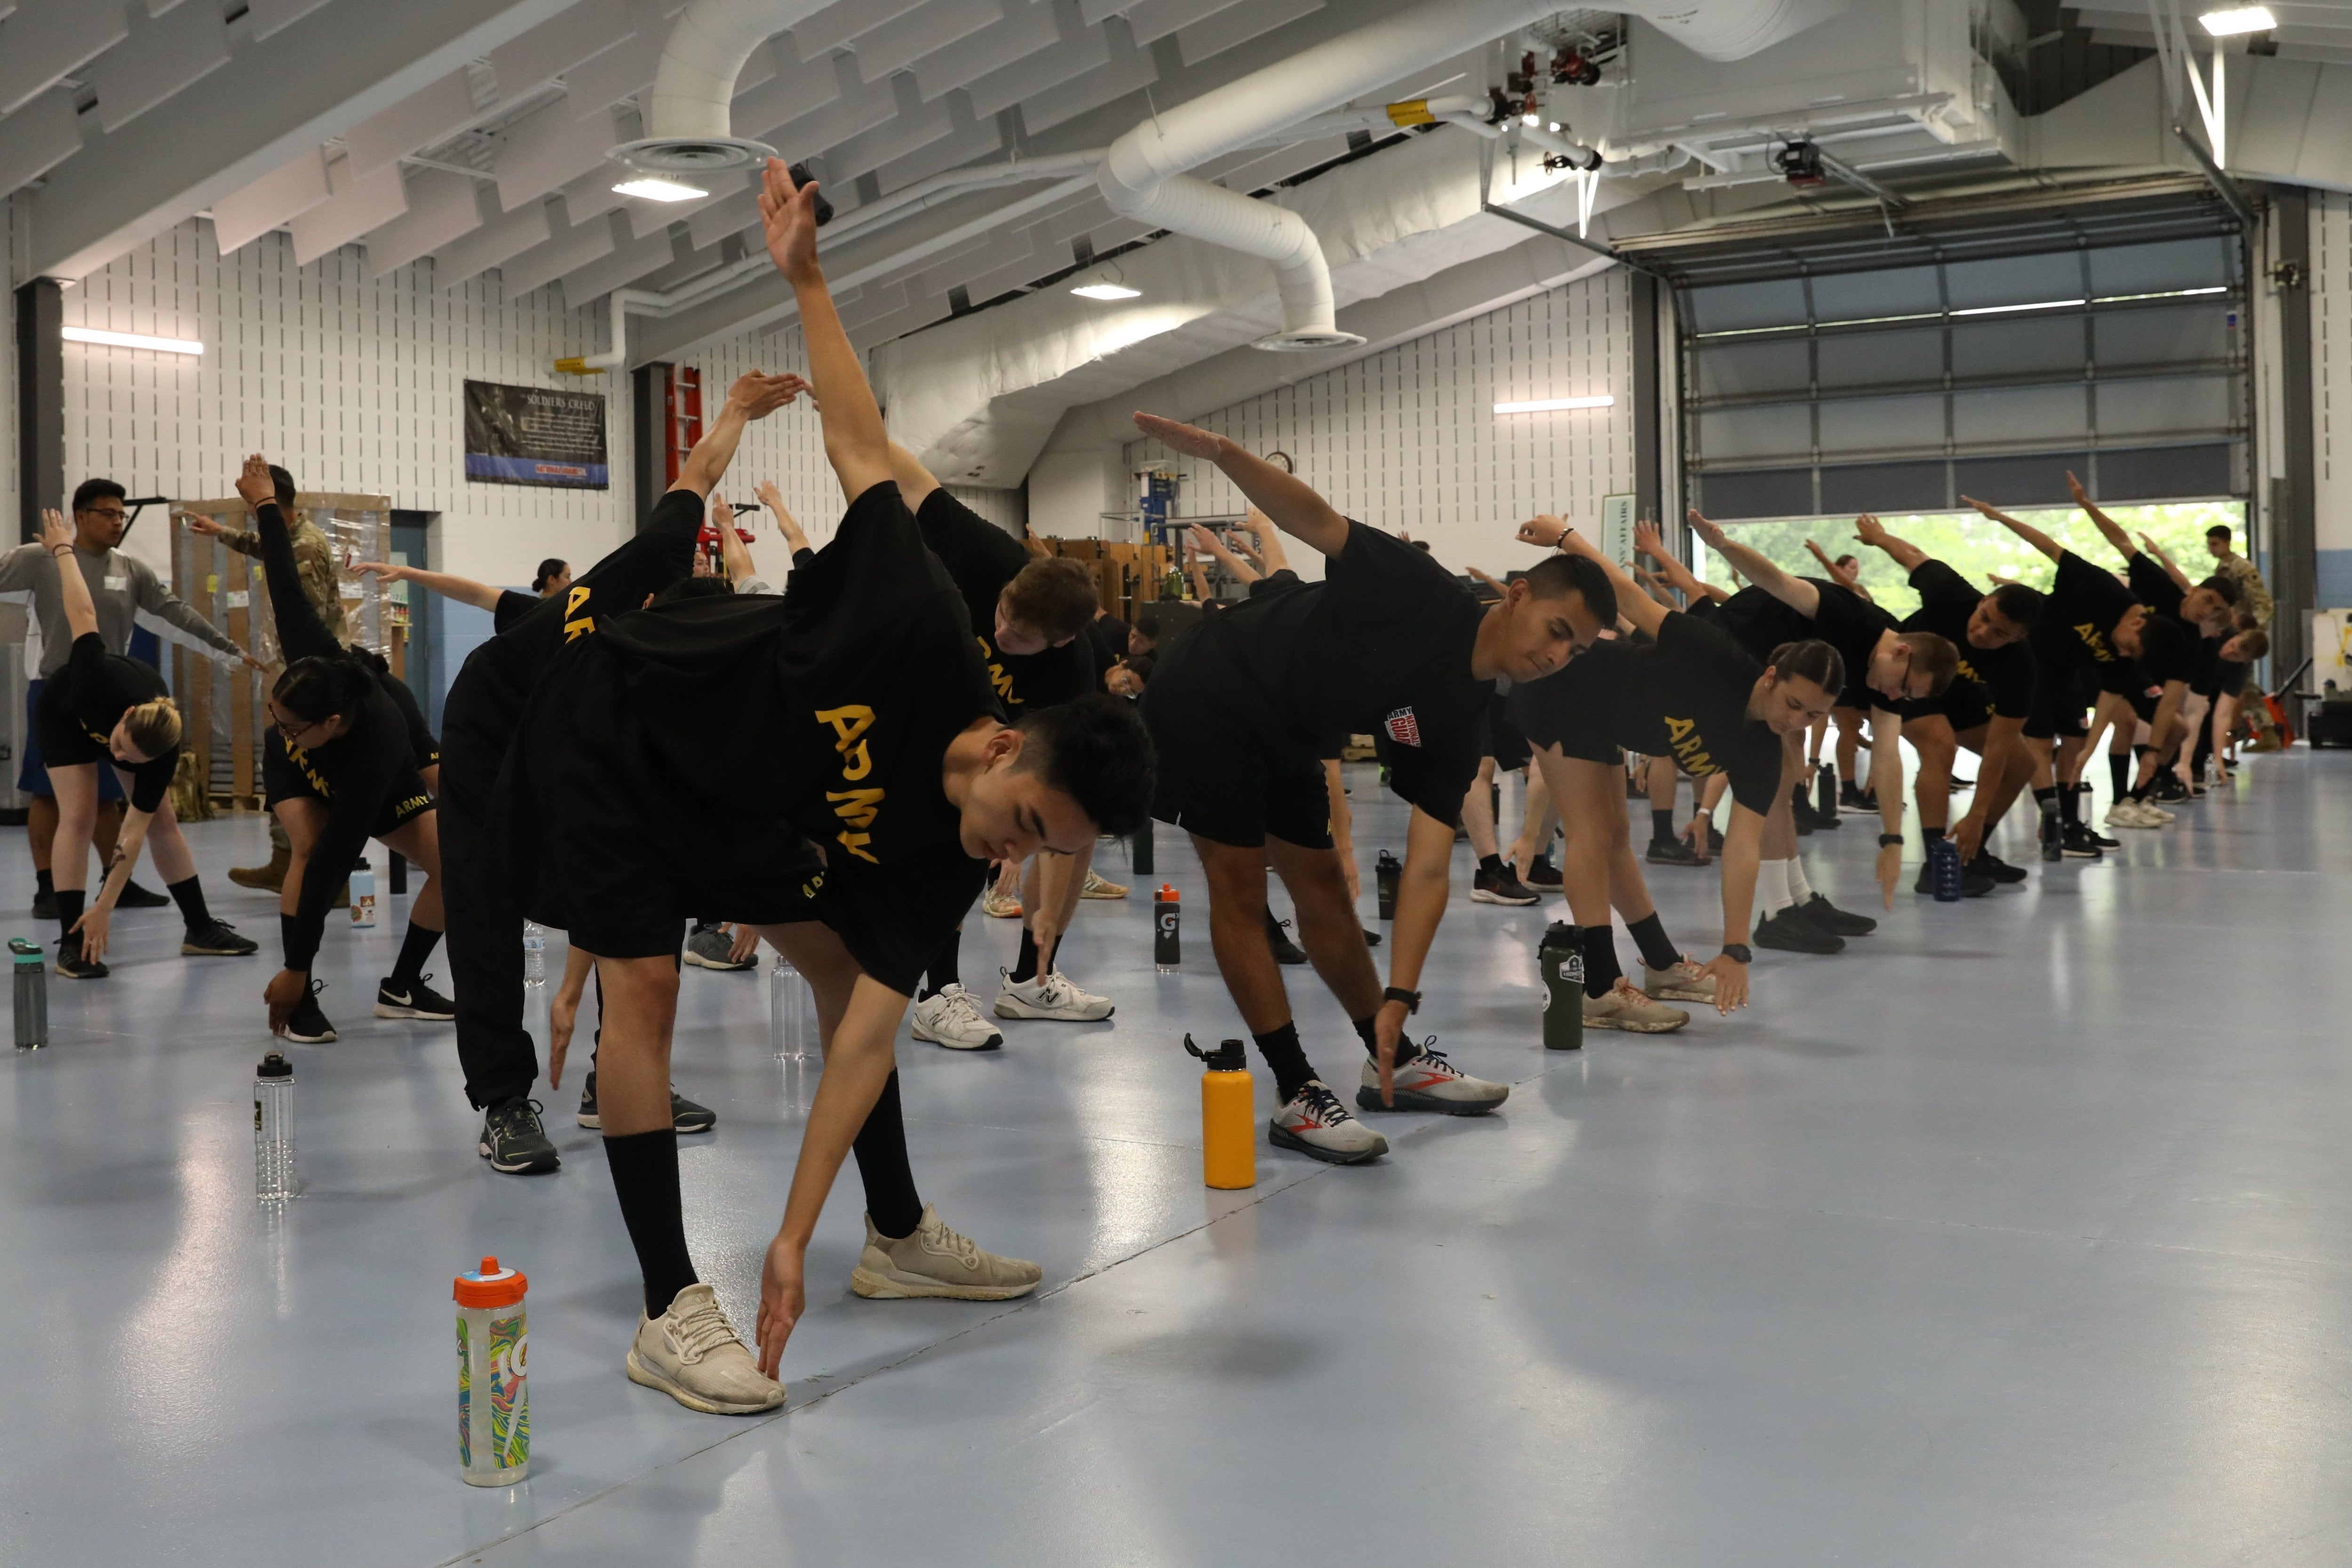 Recruits assigned to the recruit sustainment program for the Illinois Army National Guard conduct PT at the Woodstock Armory, June 12, 2022. (Cpl. Shaylin Quaid/Army)